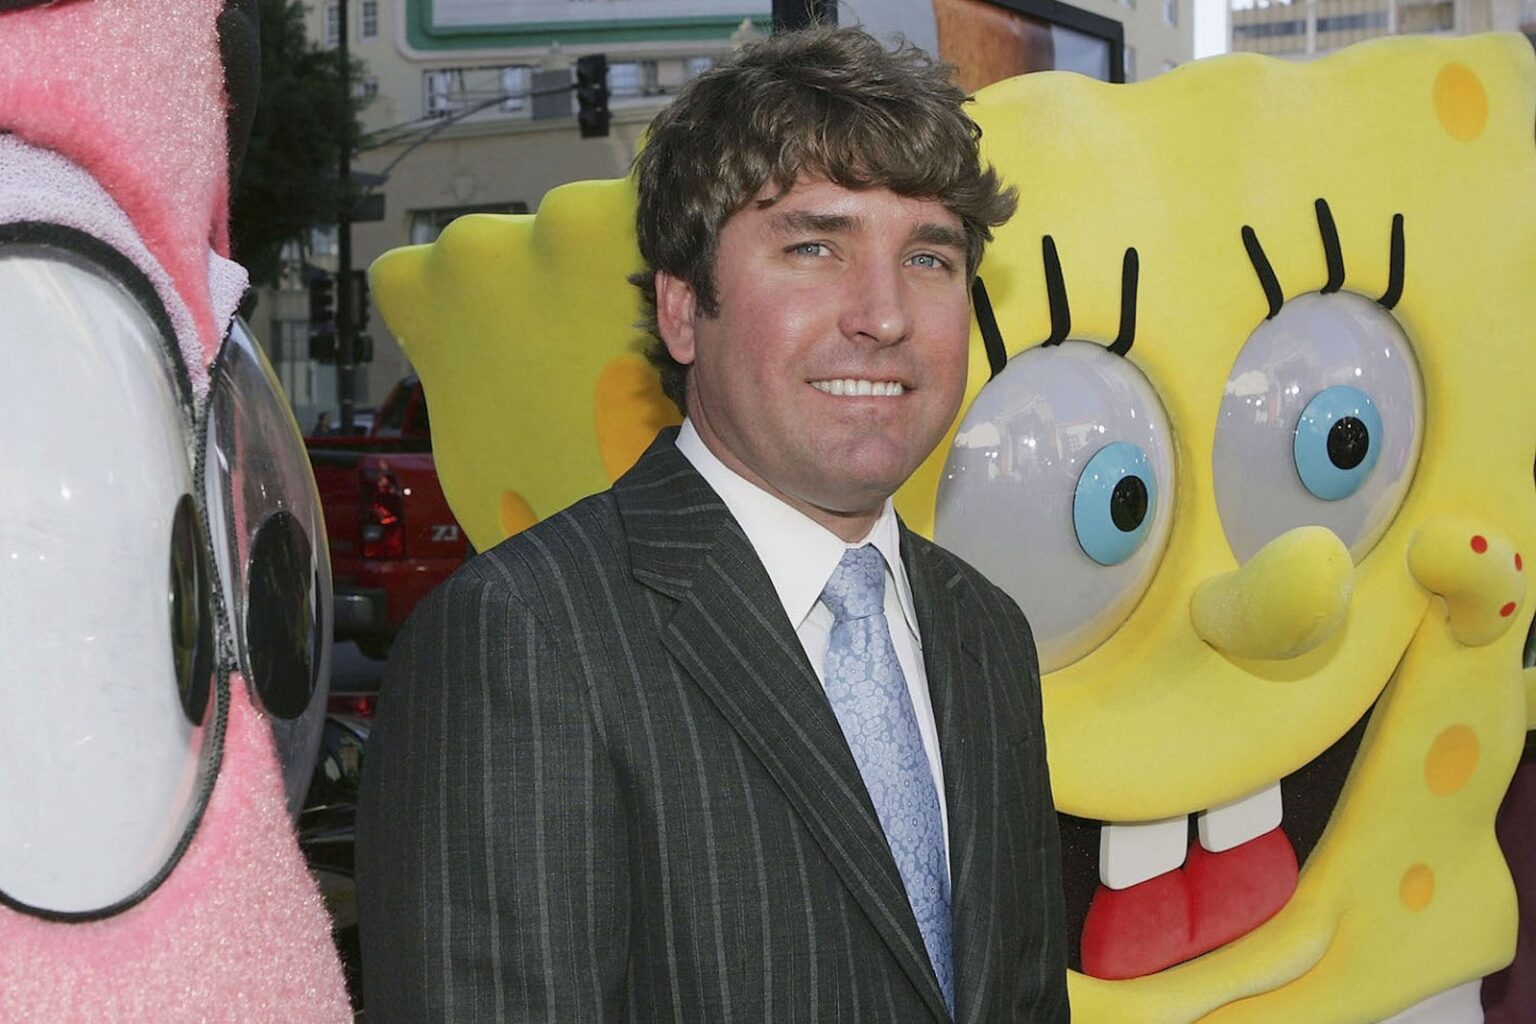 Common belief seems to be that 'Spongebob' creator Stephen Hillenburg didn't want any spinoffs to his work. Join us as we try to figure out the truth!